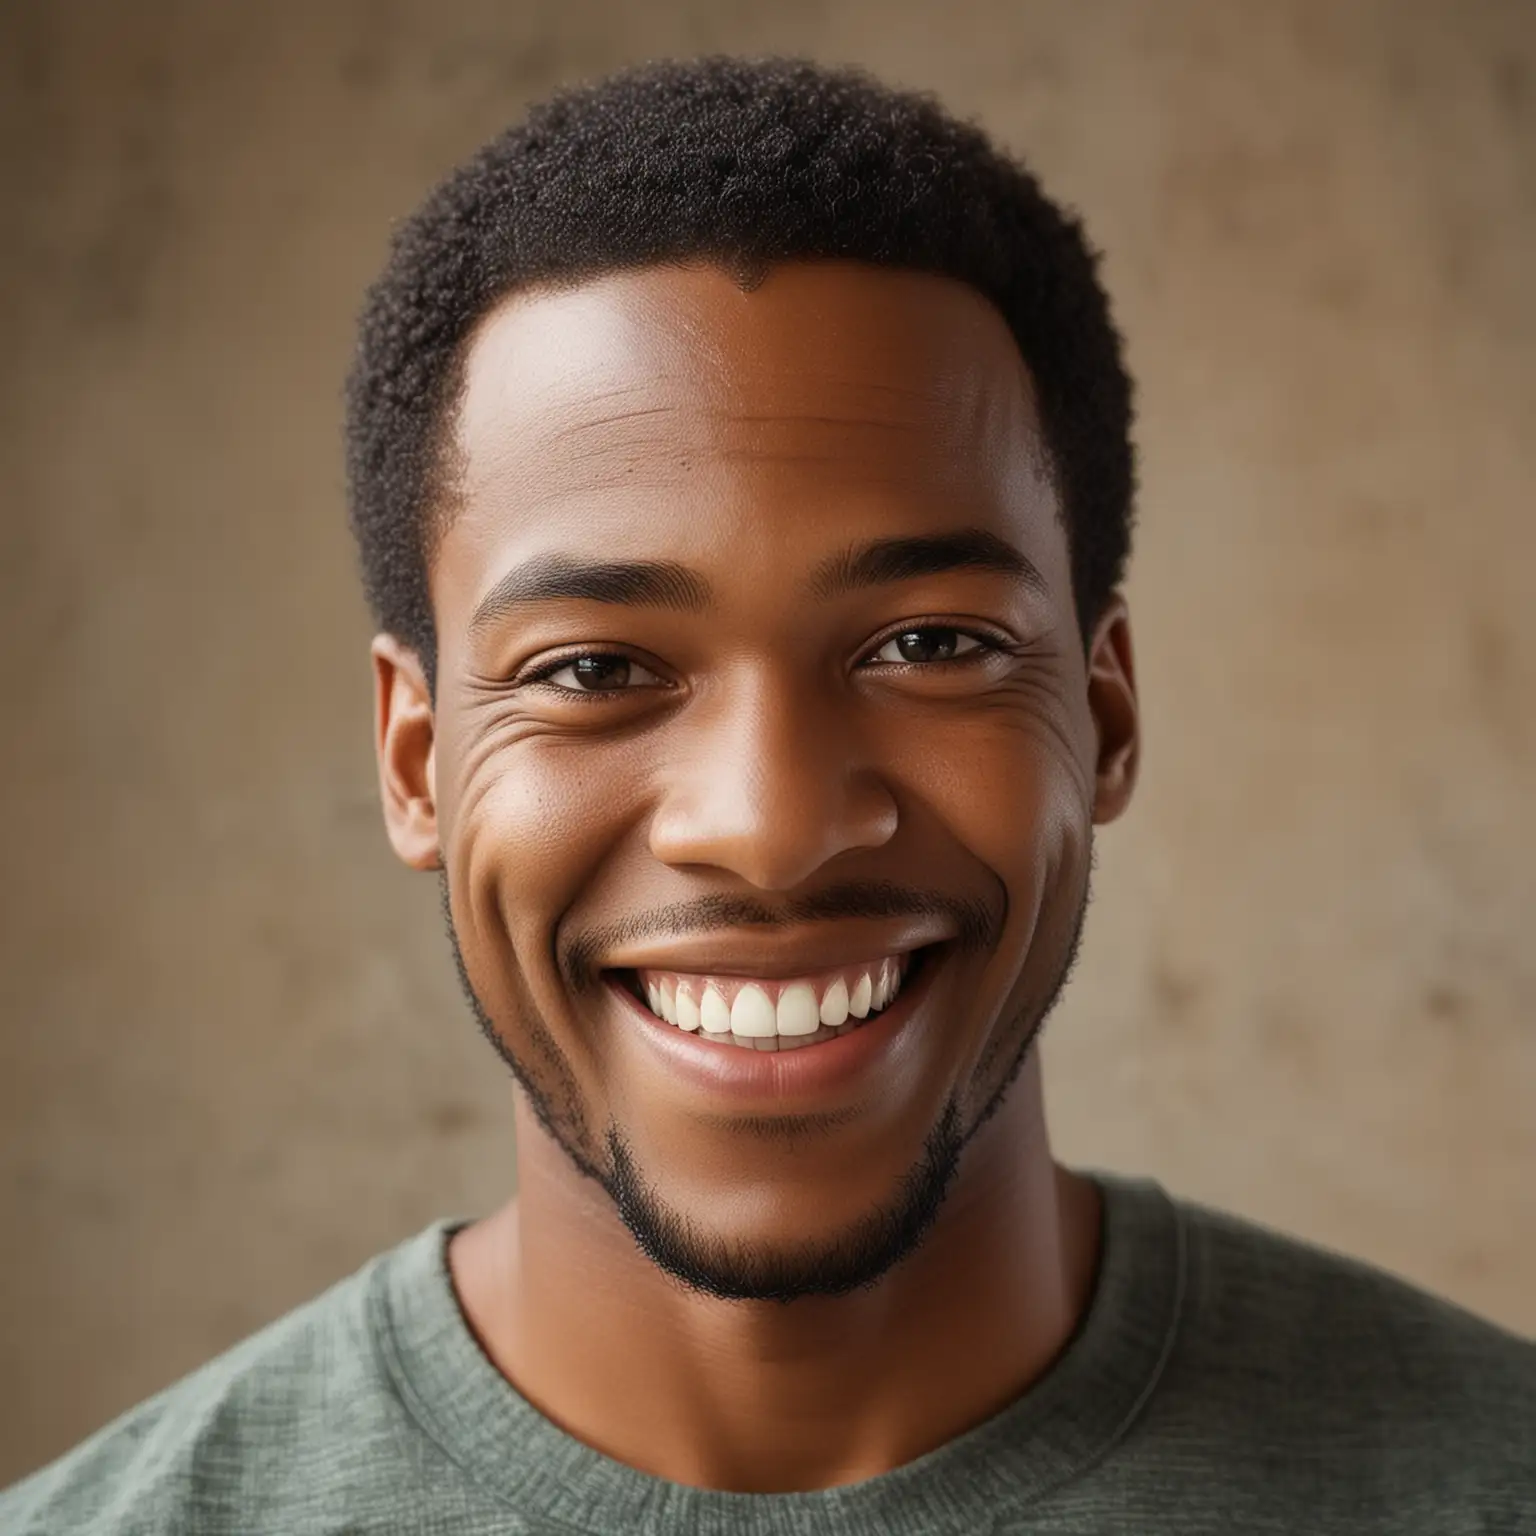 give me an image of an African-American man smiling